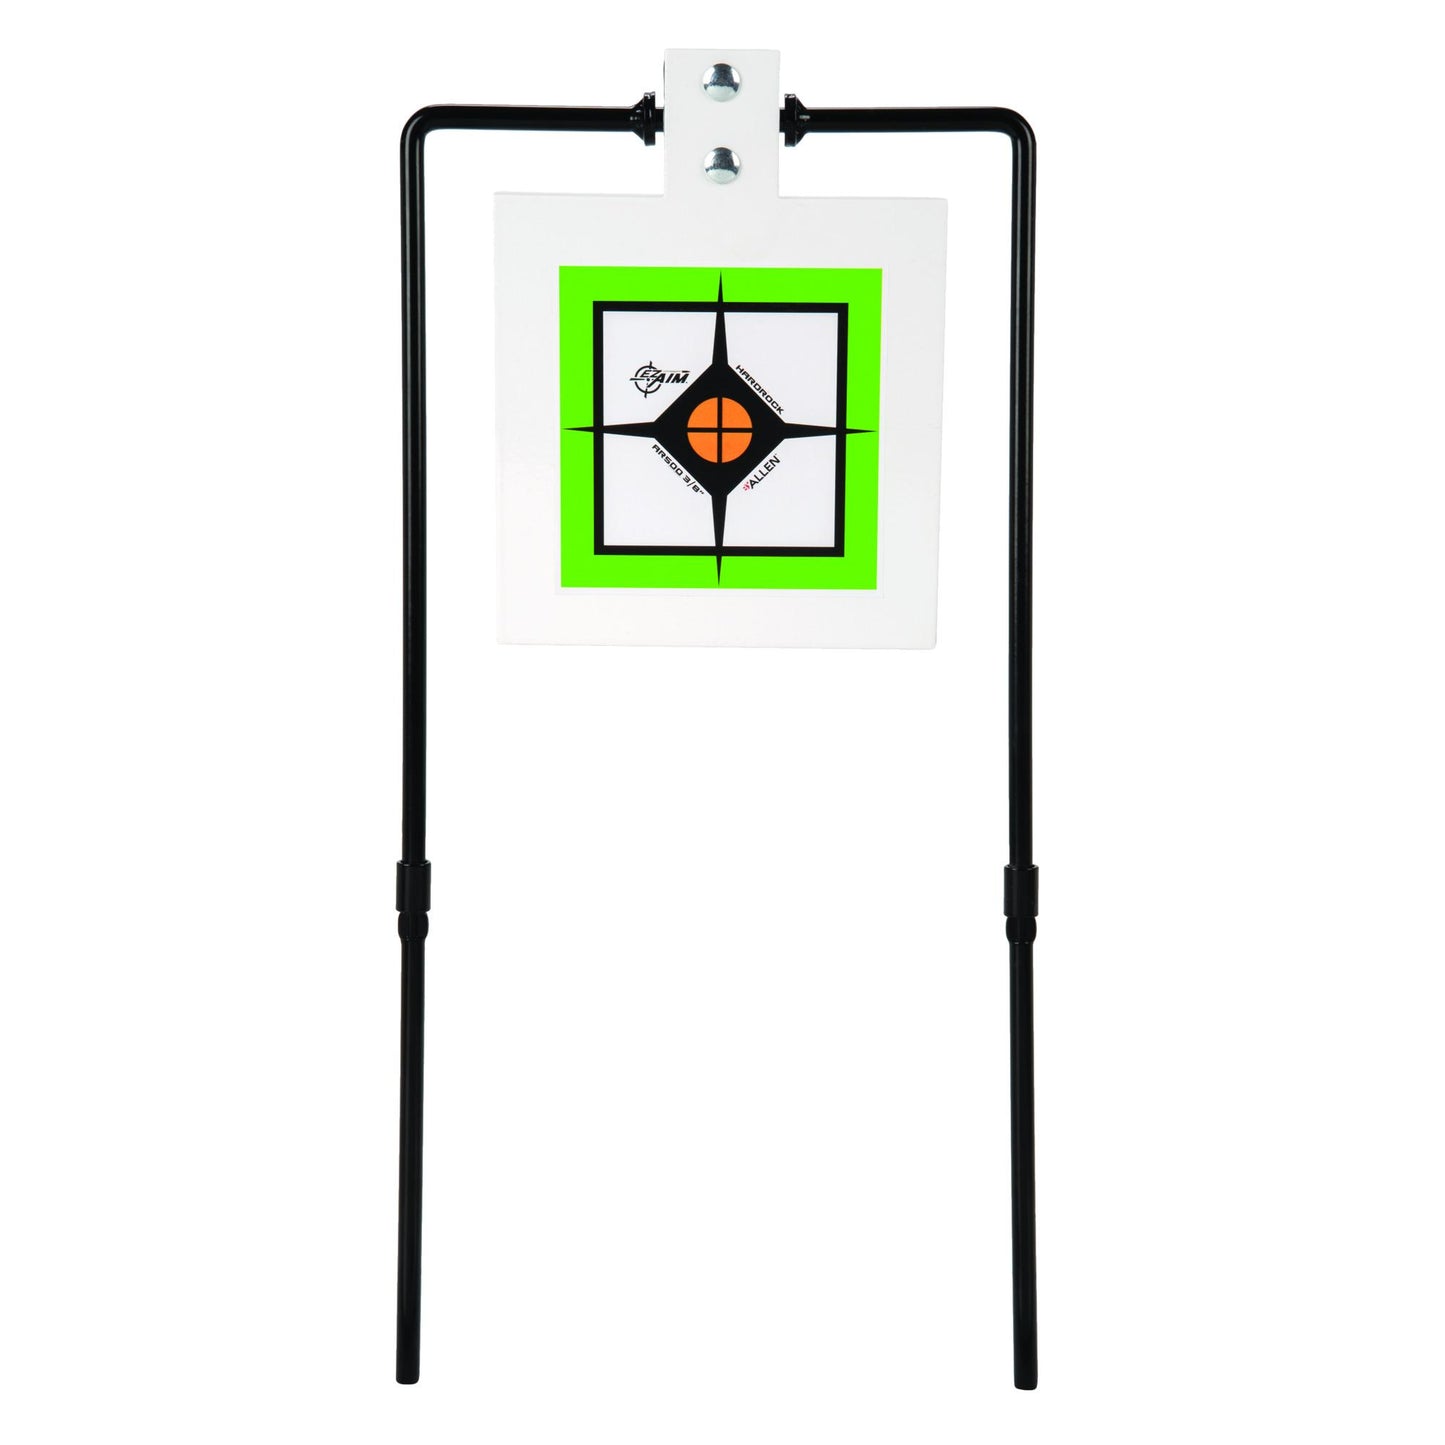 Allen 15367 EZE Aim Hardrock AR500 Target 7" Square Plate With Stand